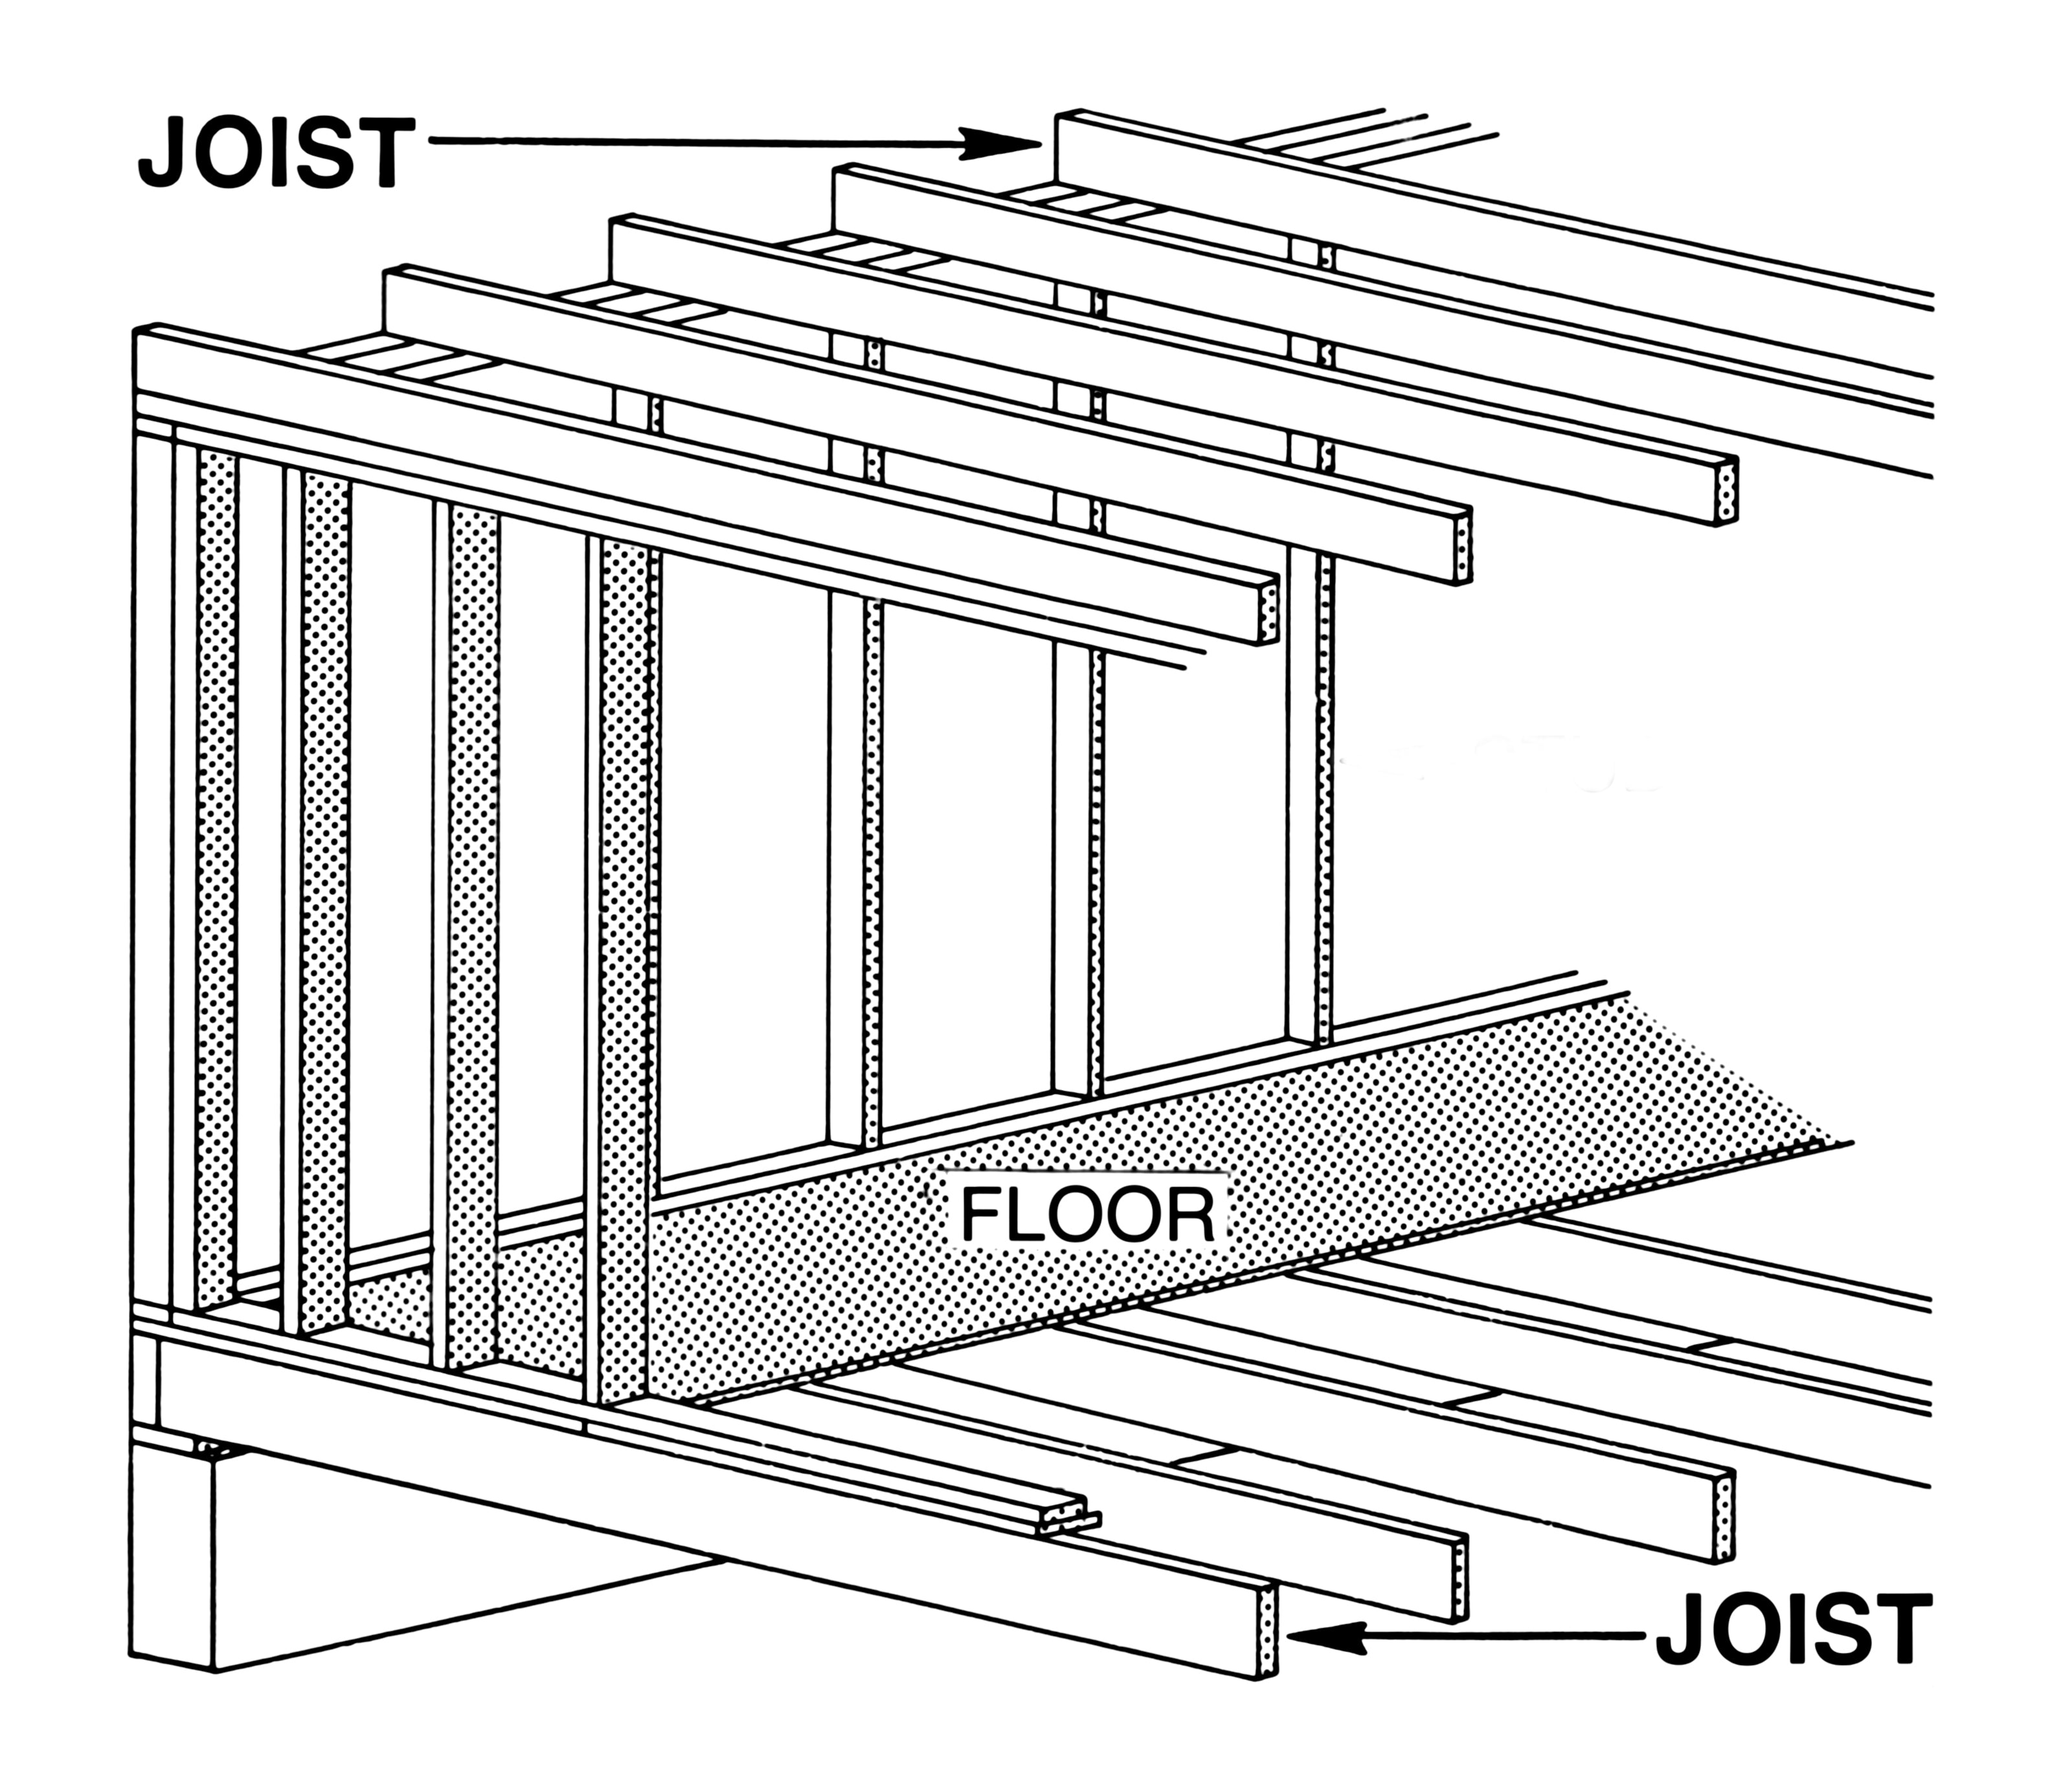 black and white drawing of joists and beams for brockwell incorporated's illustrated glossary